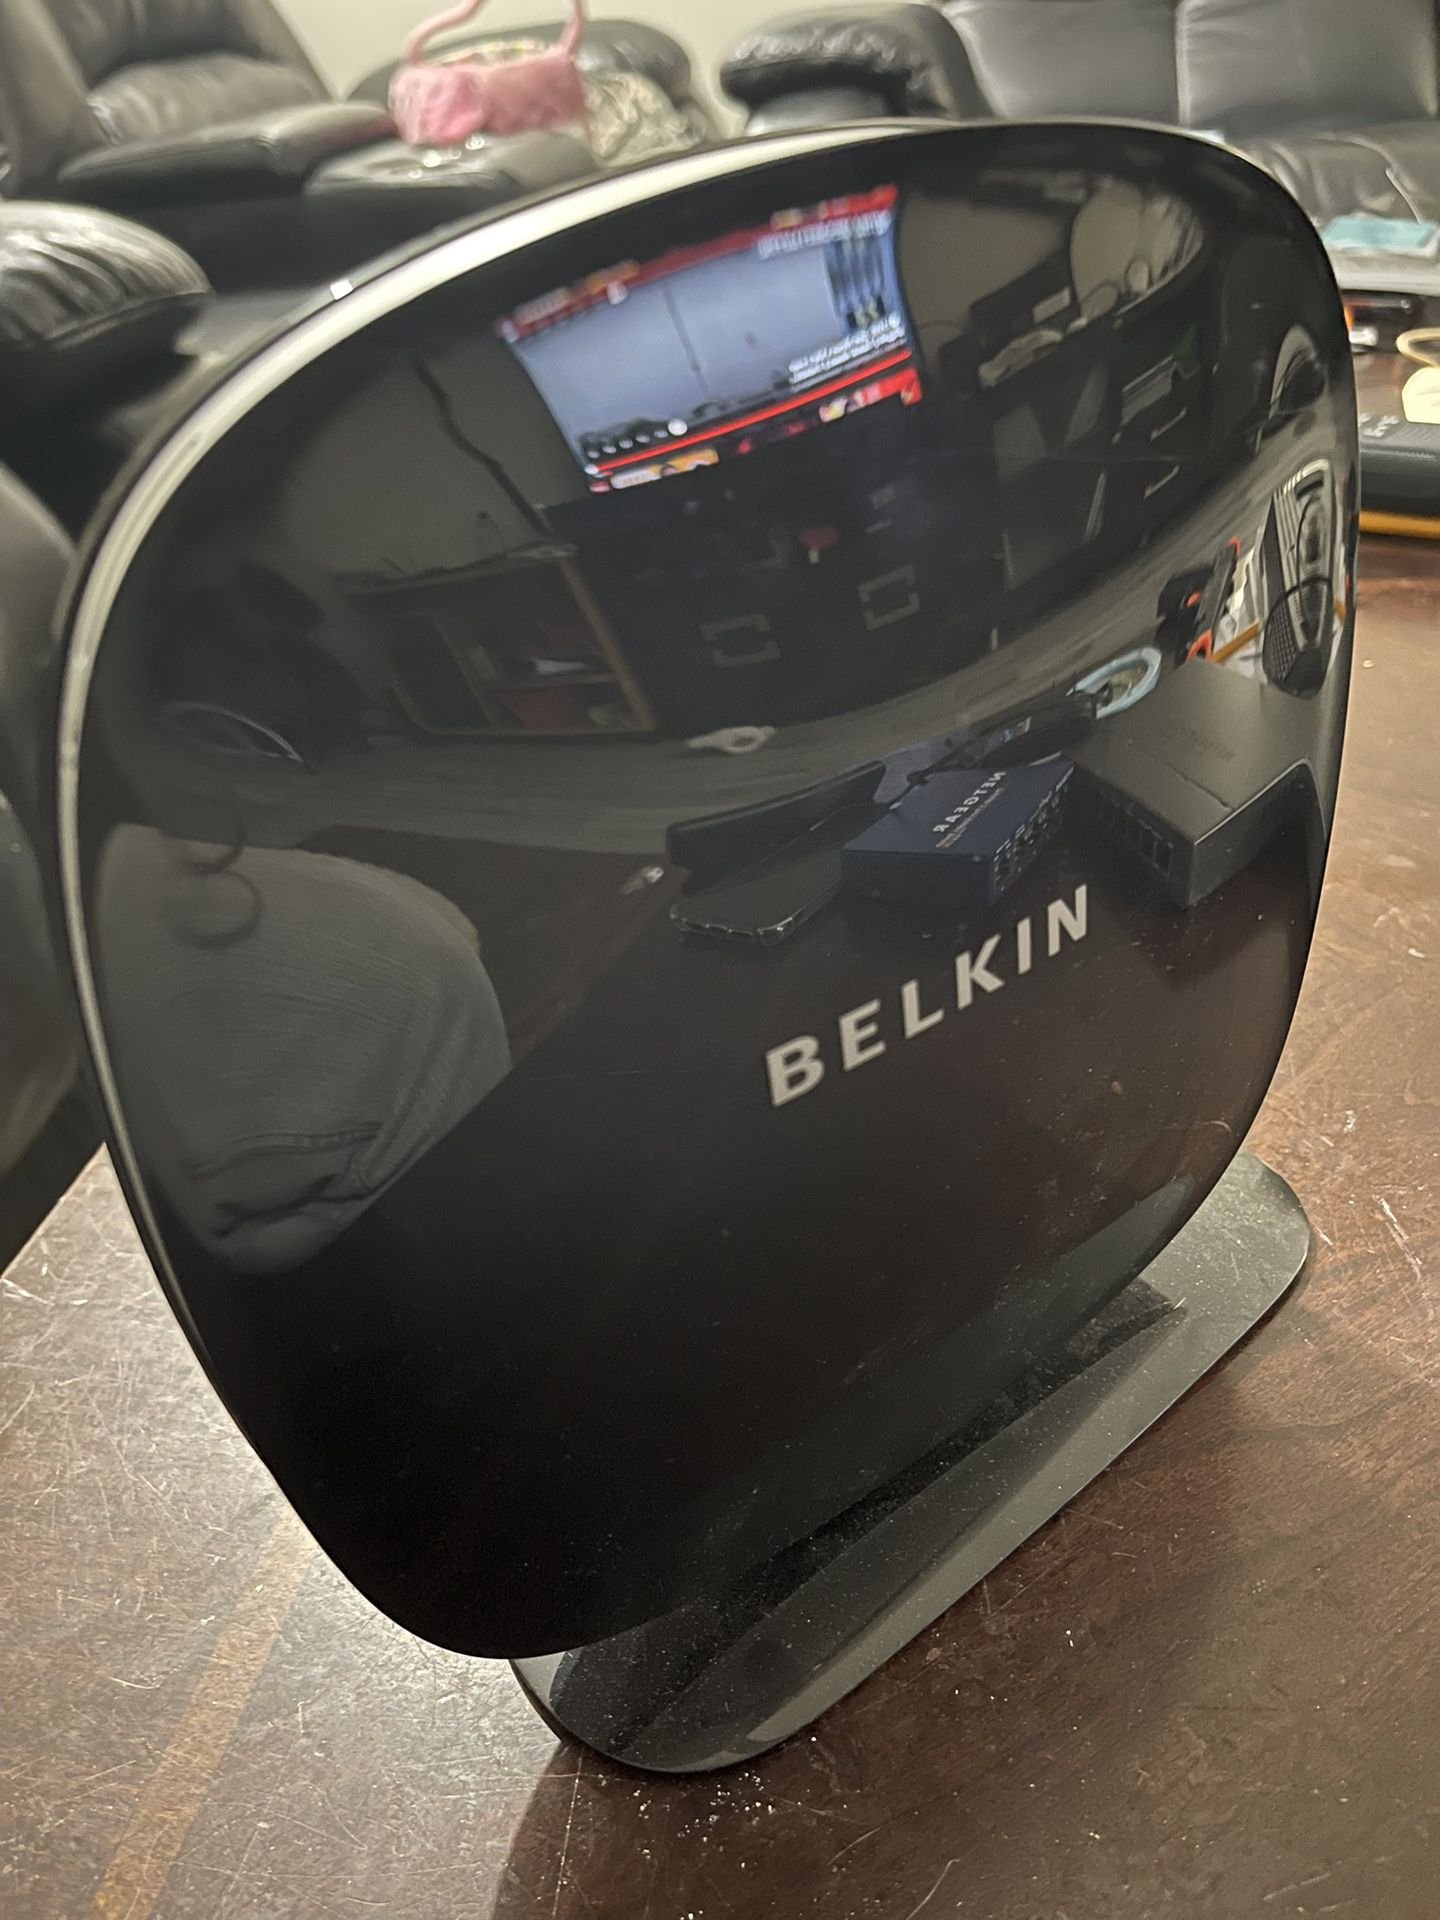 Belkin N750 DB Wireless N+ Router Model F9K1103v1 with charger. 